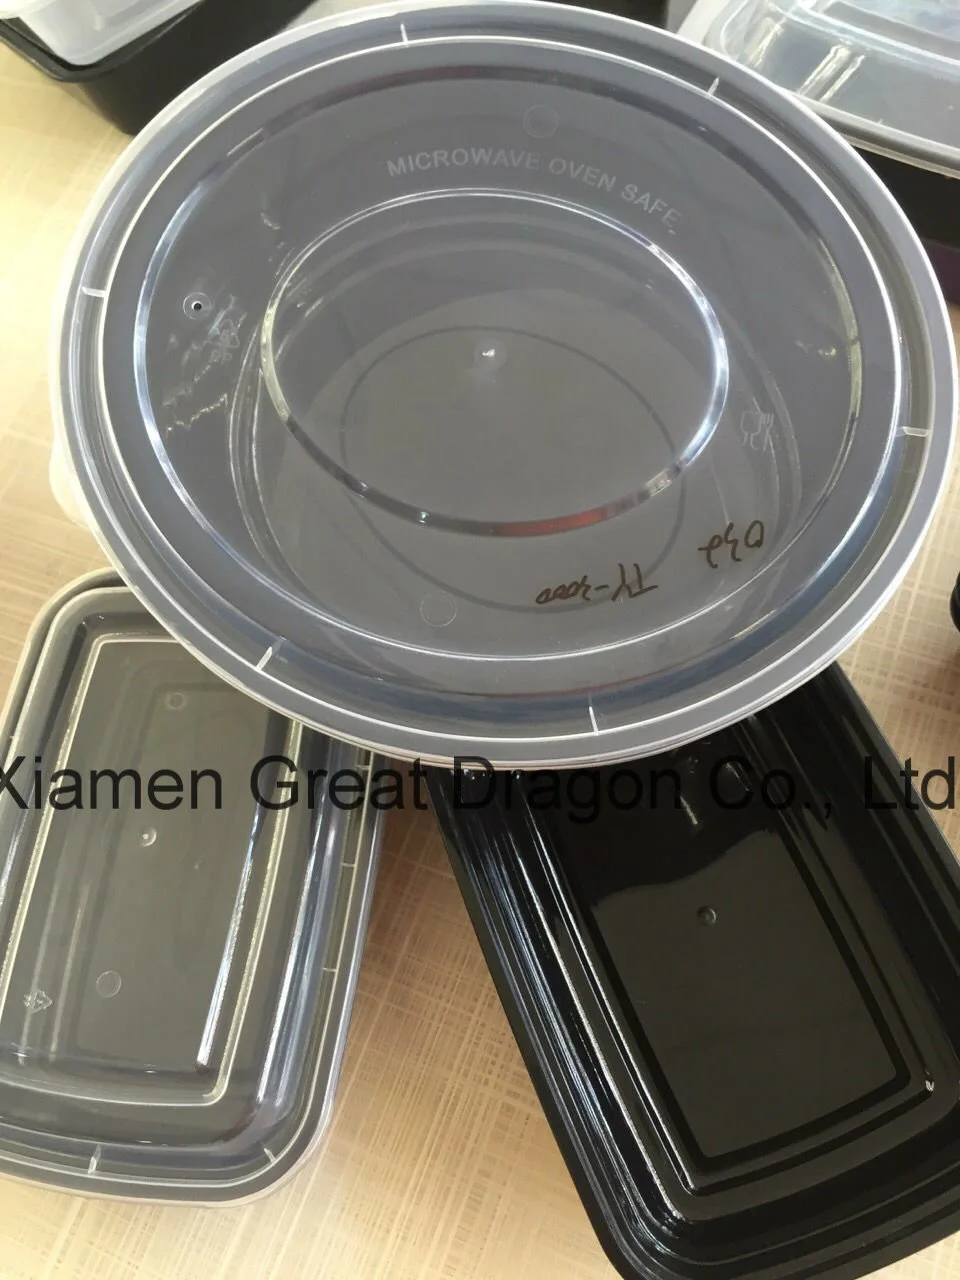 Plastic Microwave Rectangle Container (Lunch Box) (LB12010)